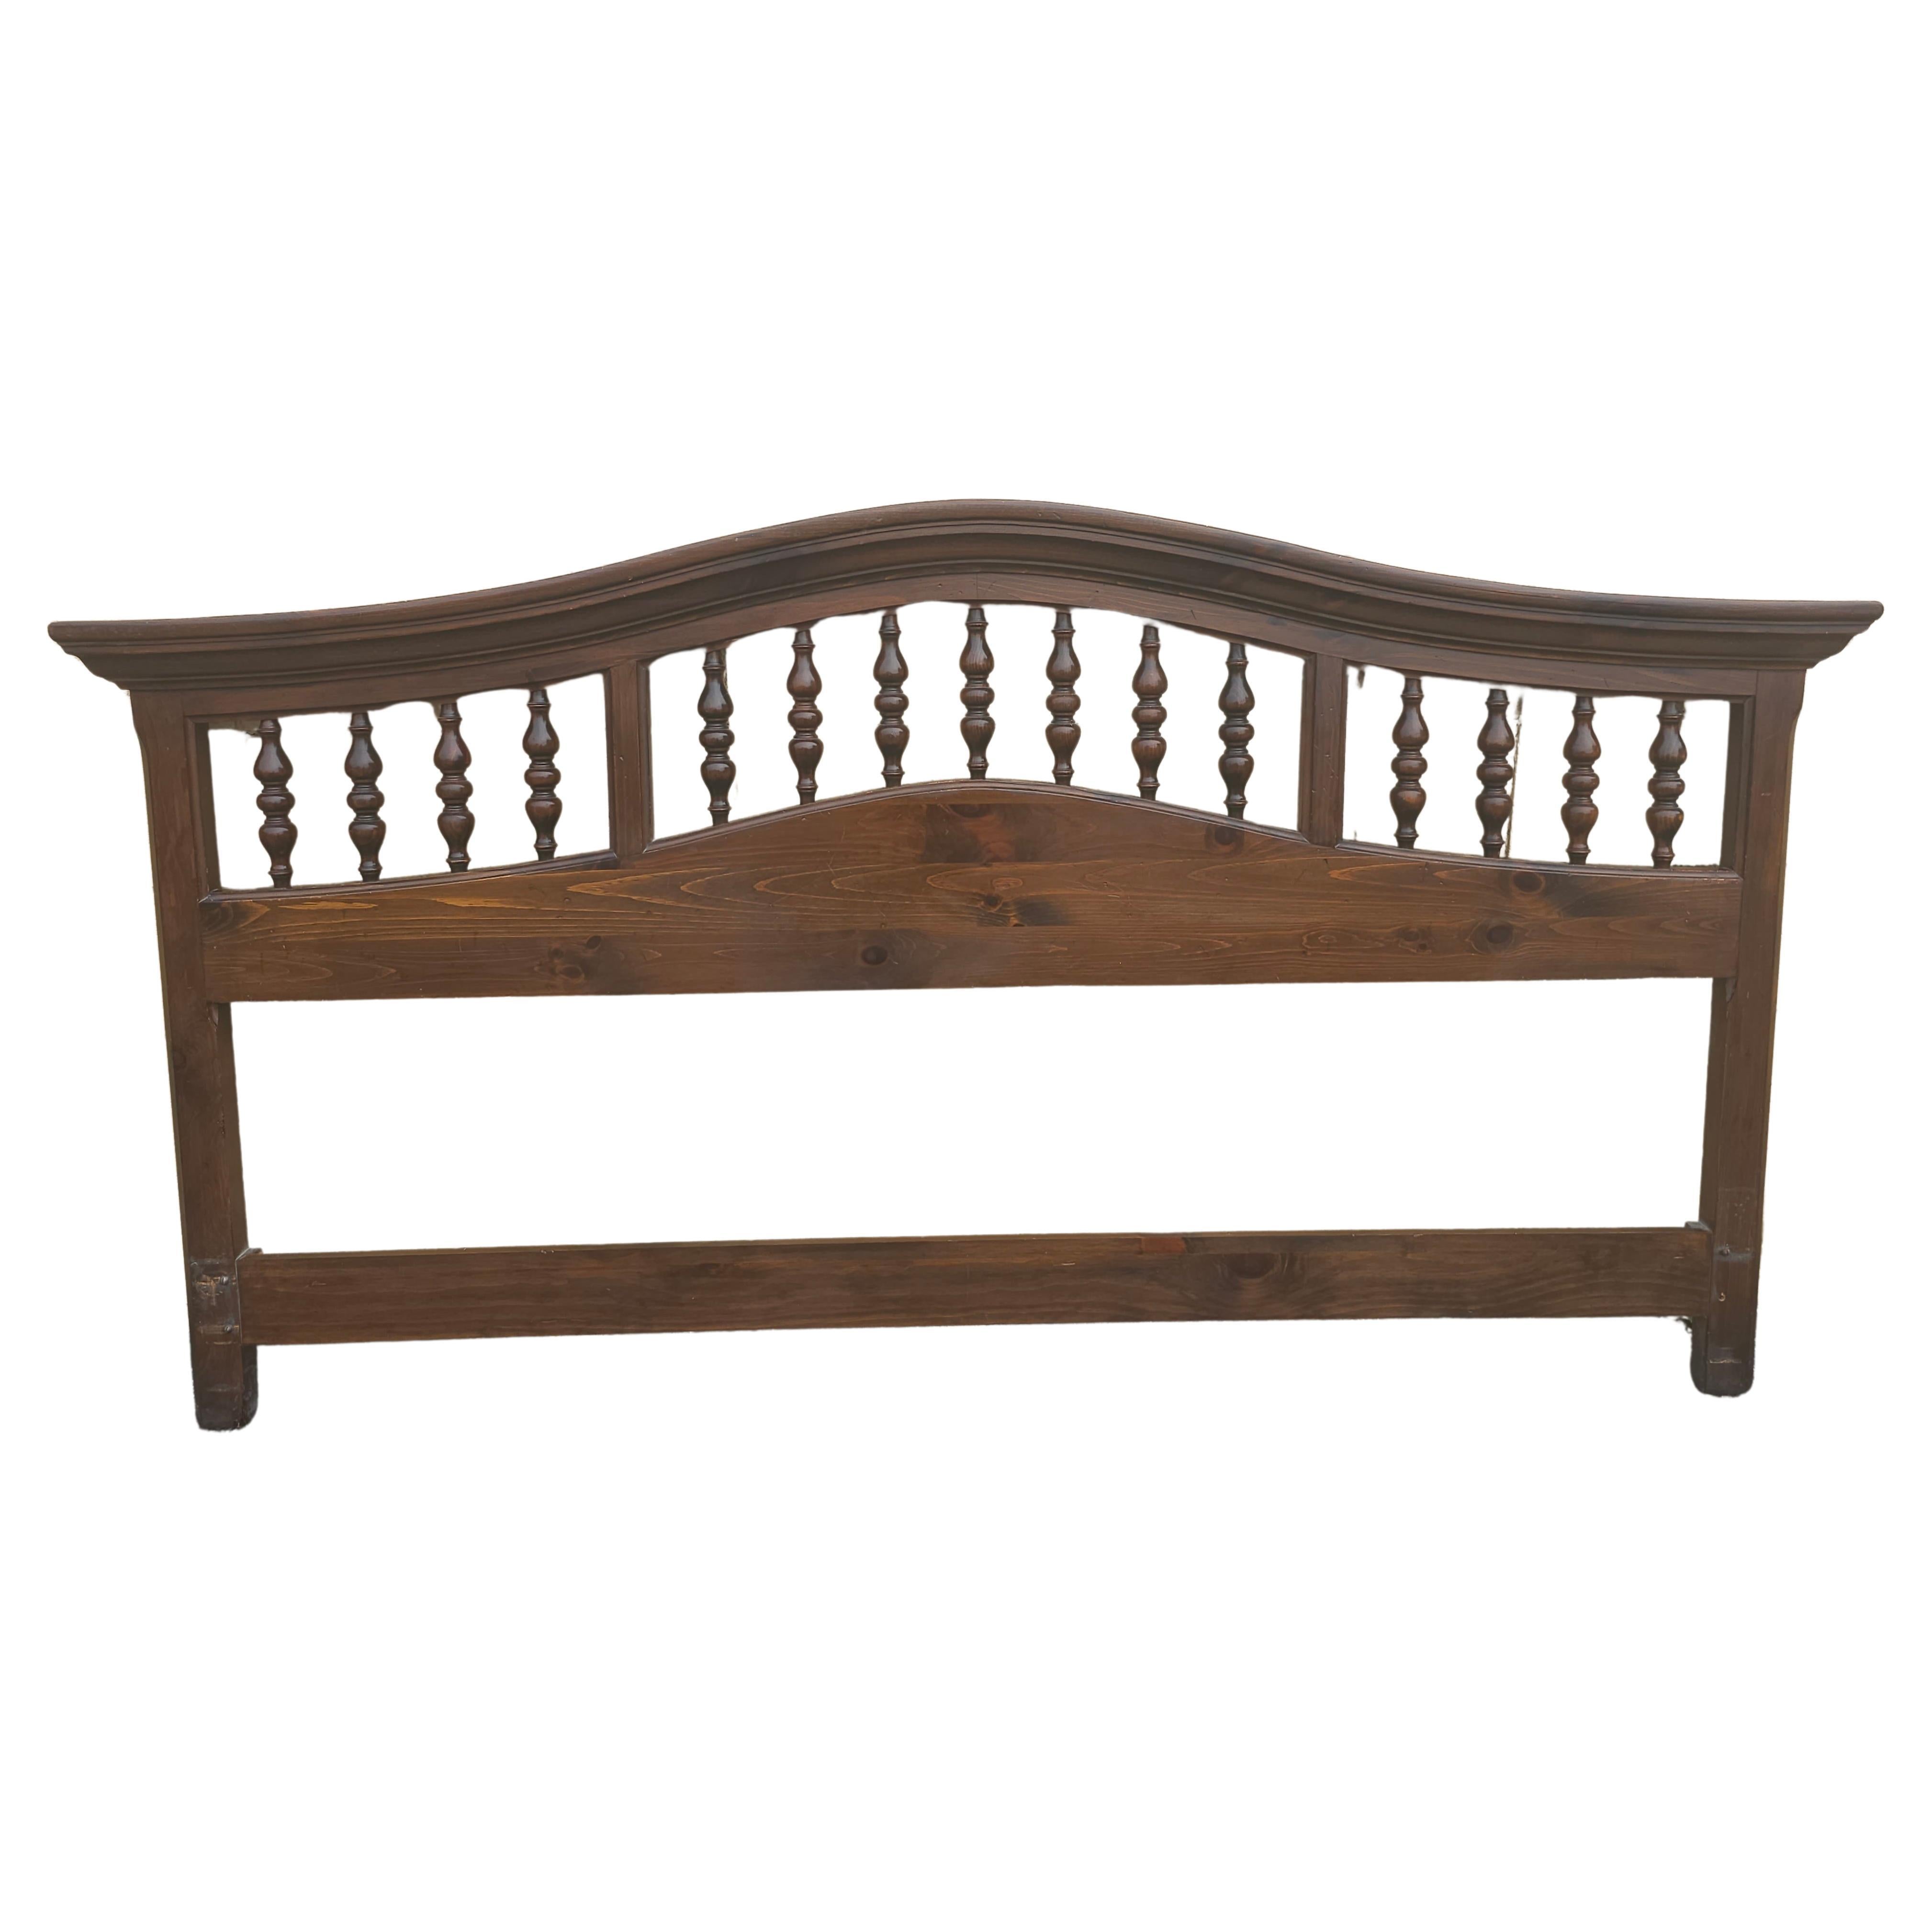 American Mid-20th Century Antiqued Pine King Size Arched Top Headboard For Sale